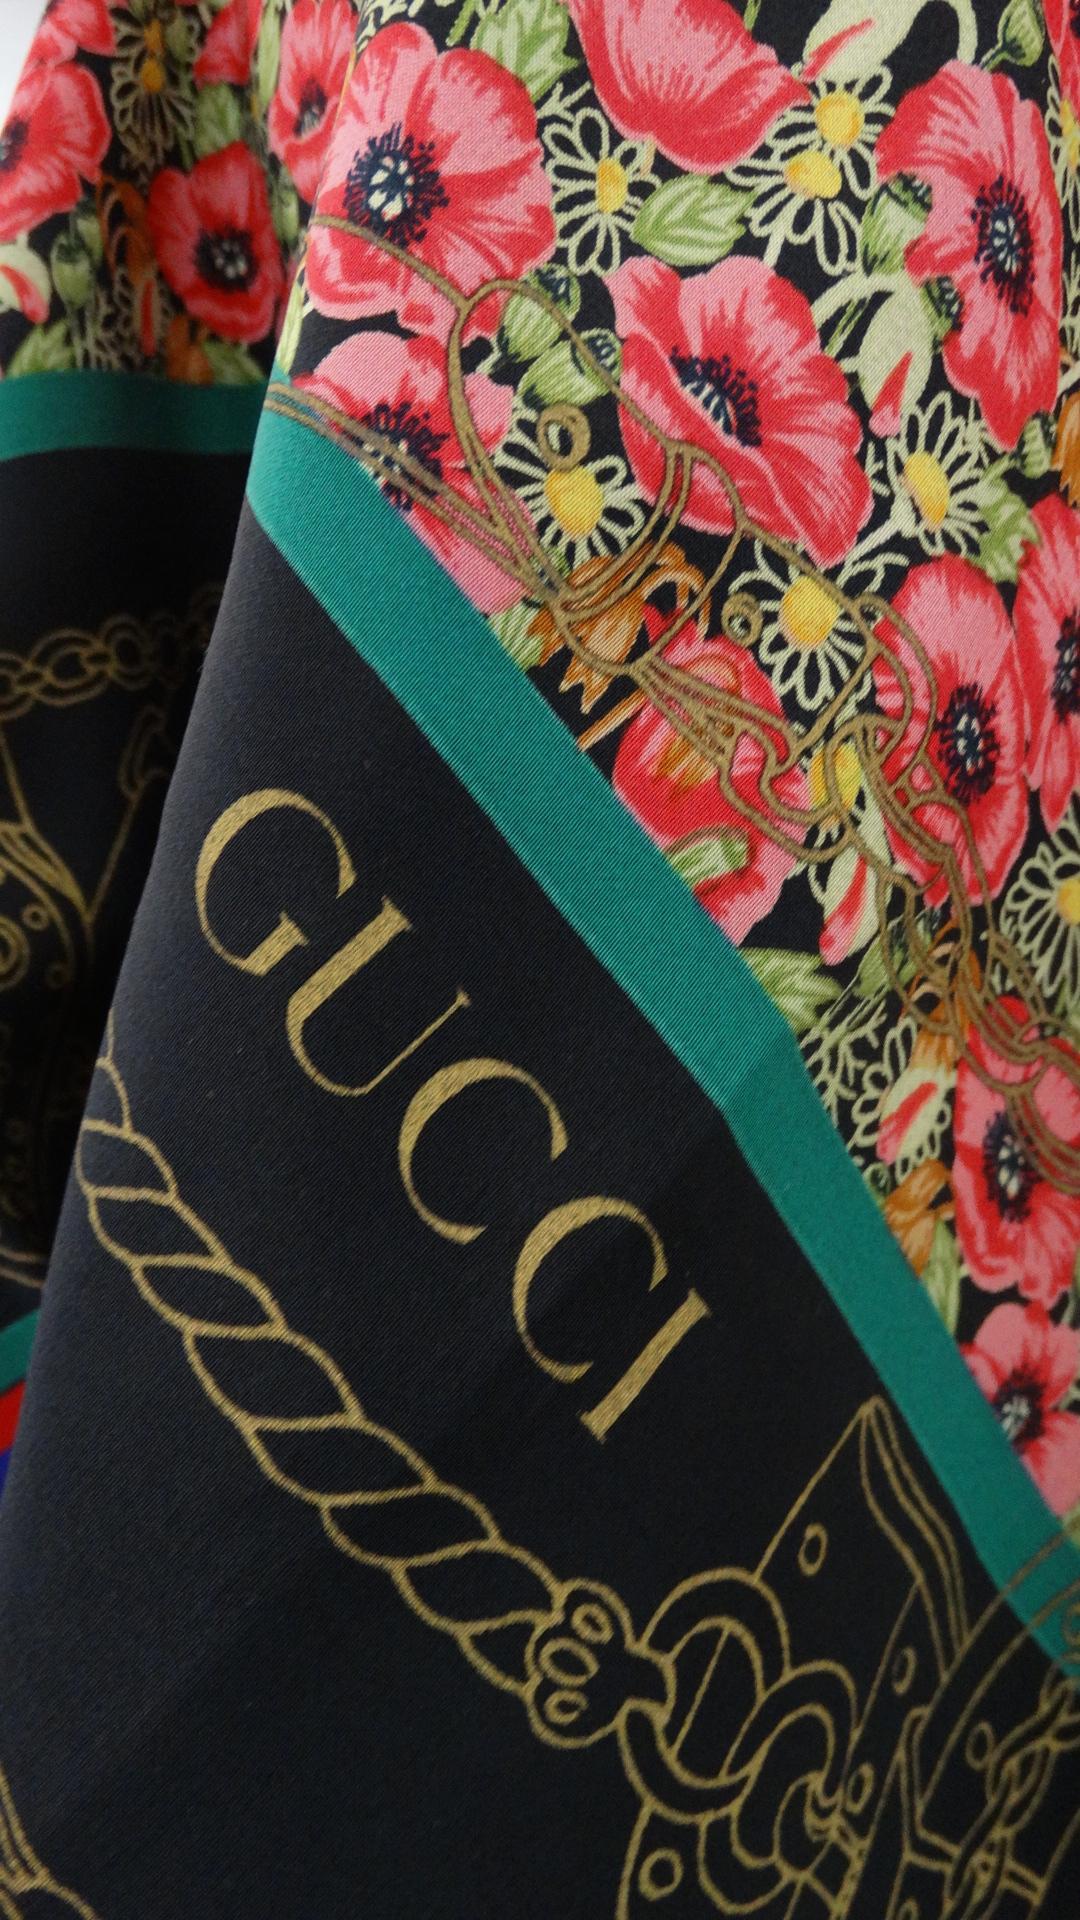 Amazing 1980s floral scarf from none other than Gucci! Solid black background with multicolored stripes around the perimeter, framing a dense, lush floral print! We love scarves for their versatility- wear knotted around the neck as an ascot, tie